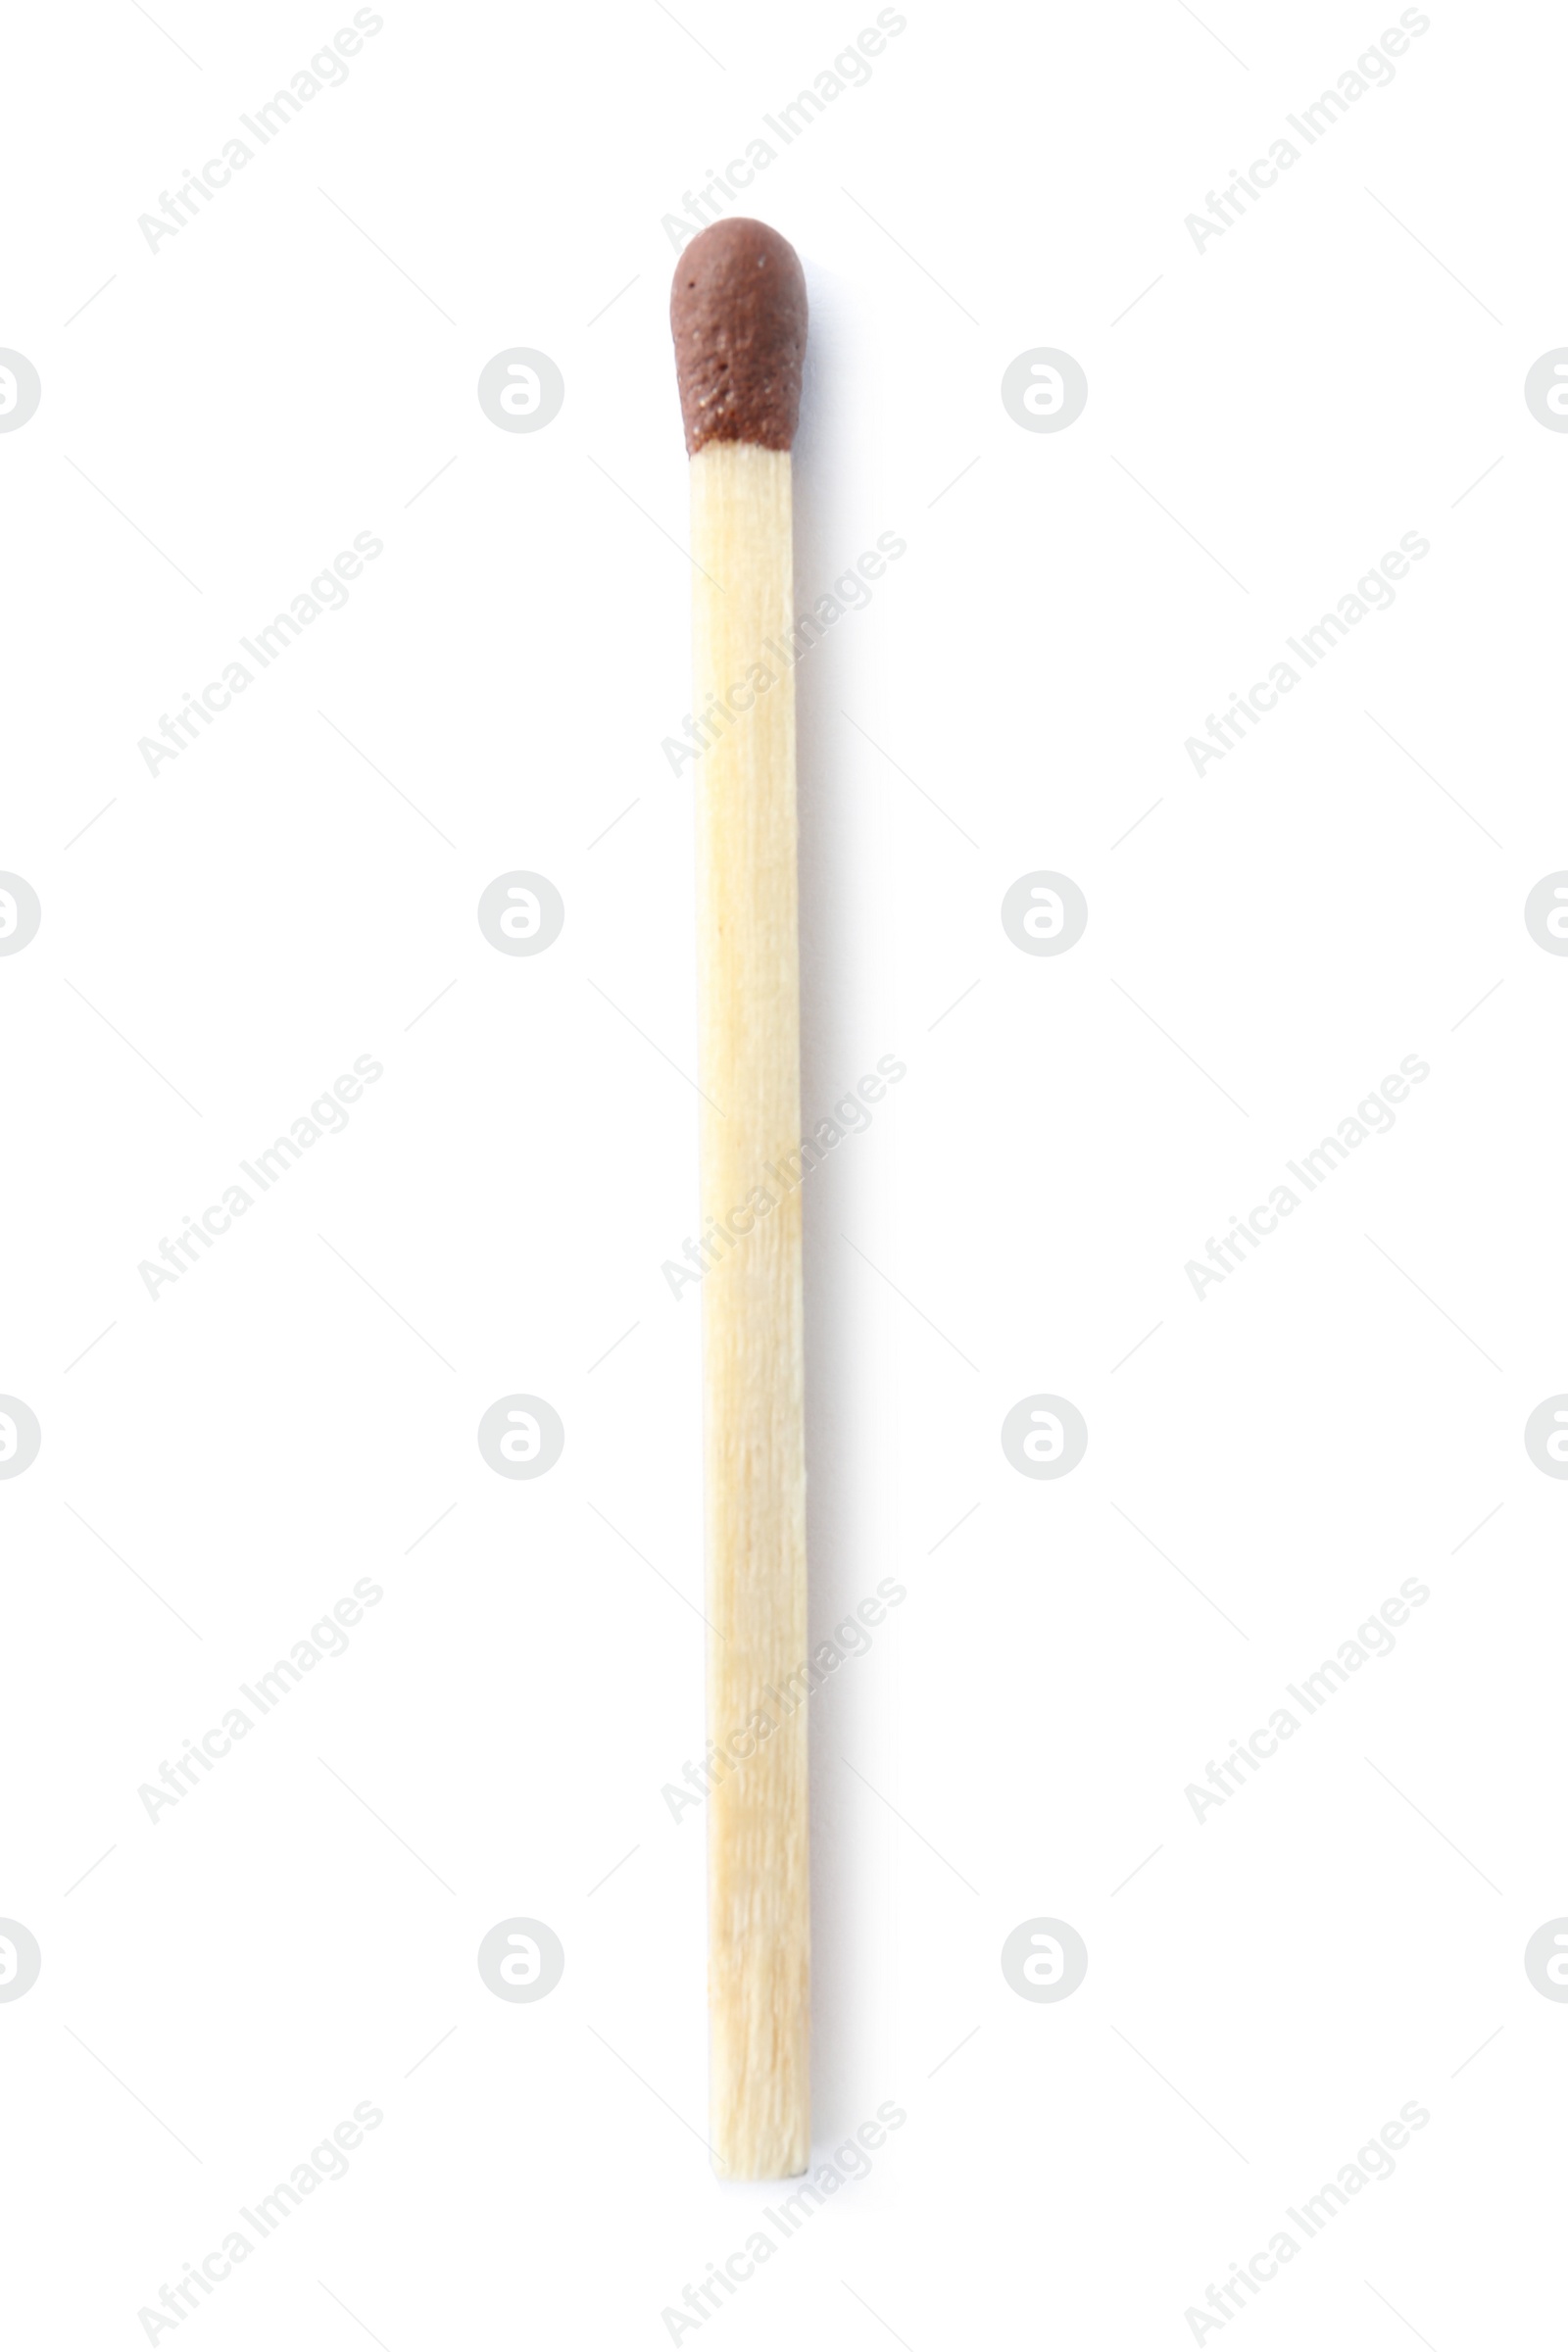 Photo of Wooden match on white background, top view